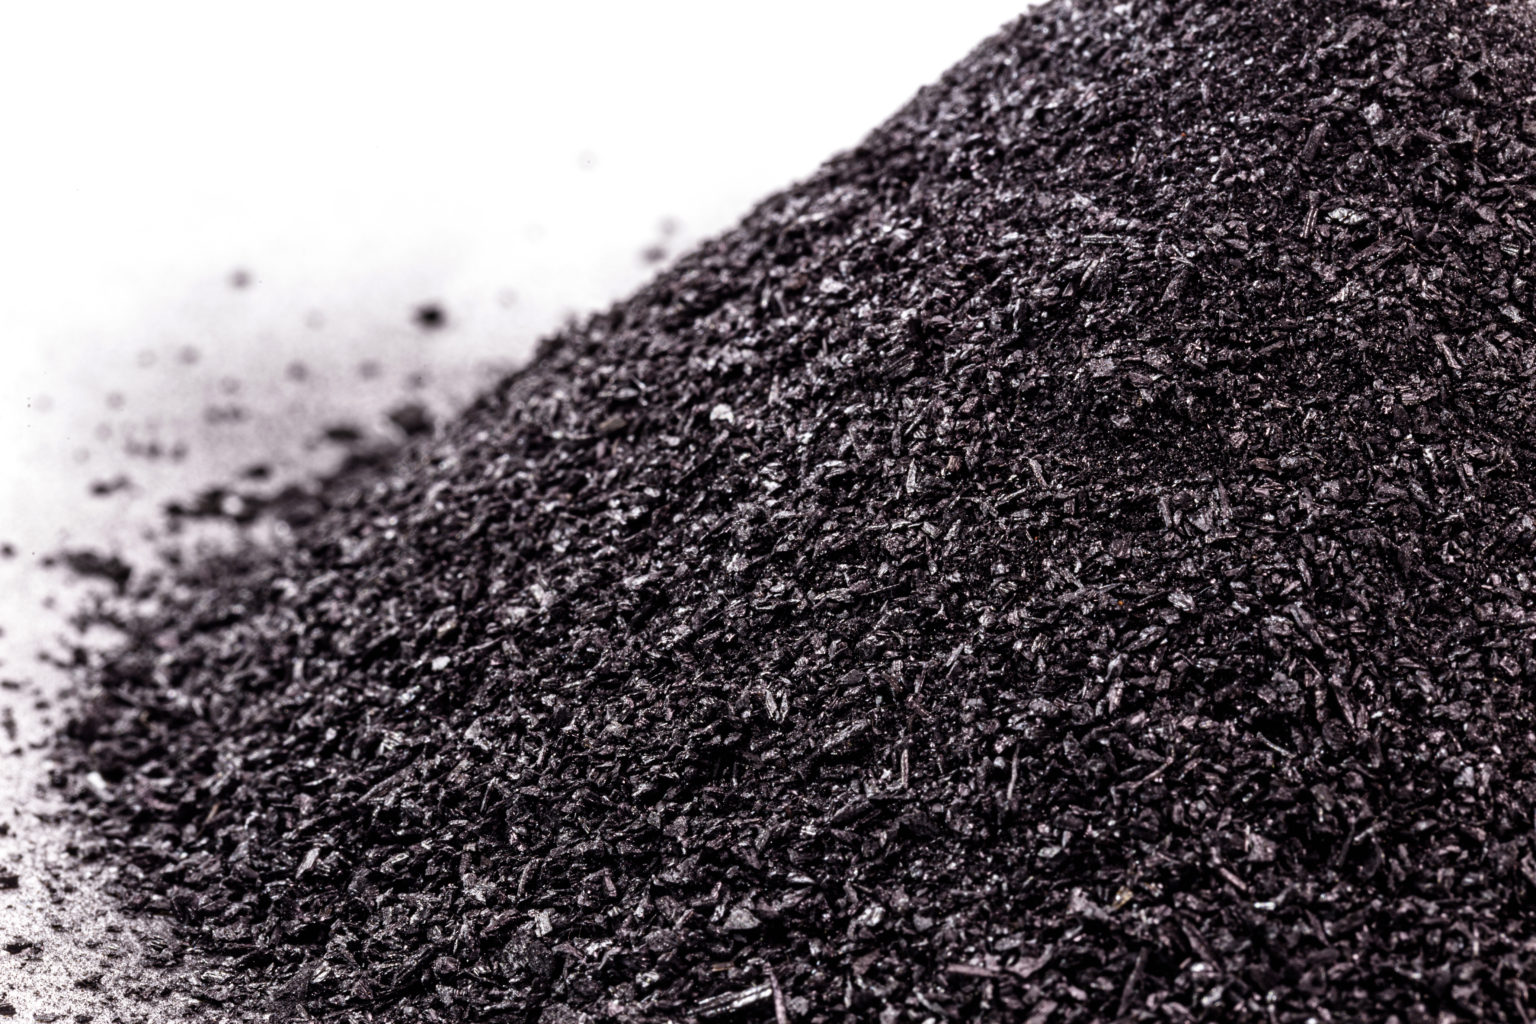 China allows a trickle of critical minerals exports ahead of graphite curbs